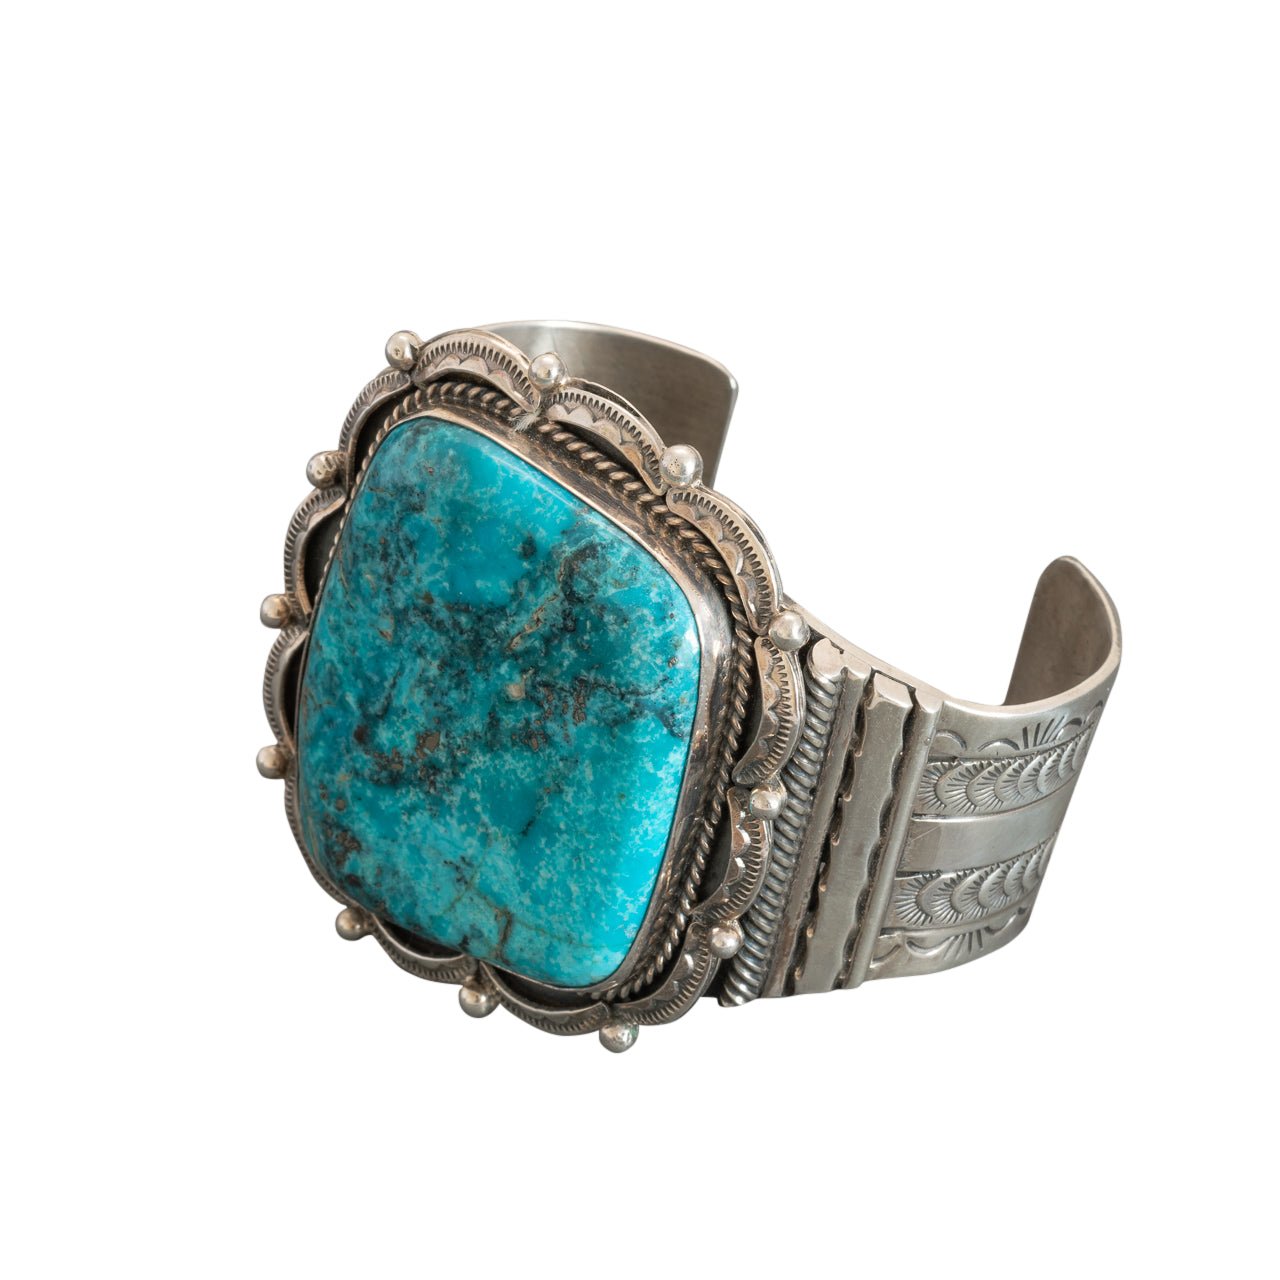 Vintage Wide Navajo Turquoise Cuff Bracelet By Henry Sam - Turquoise & Tufa